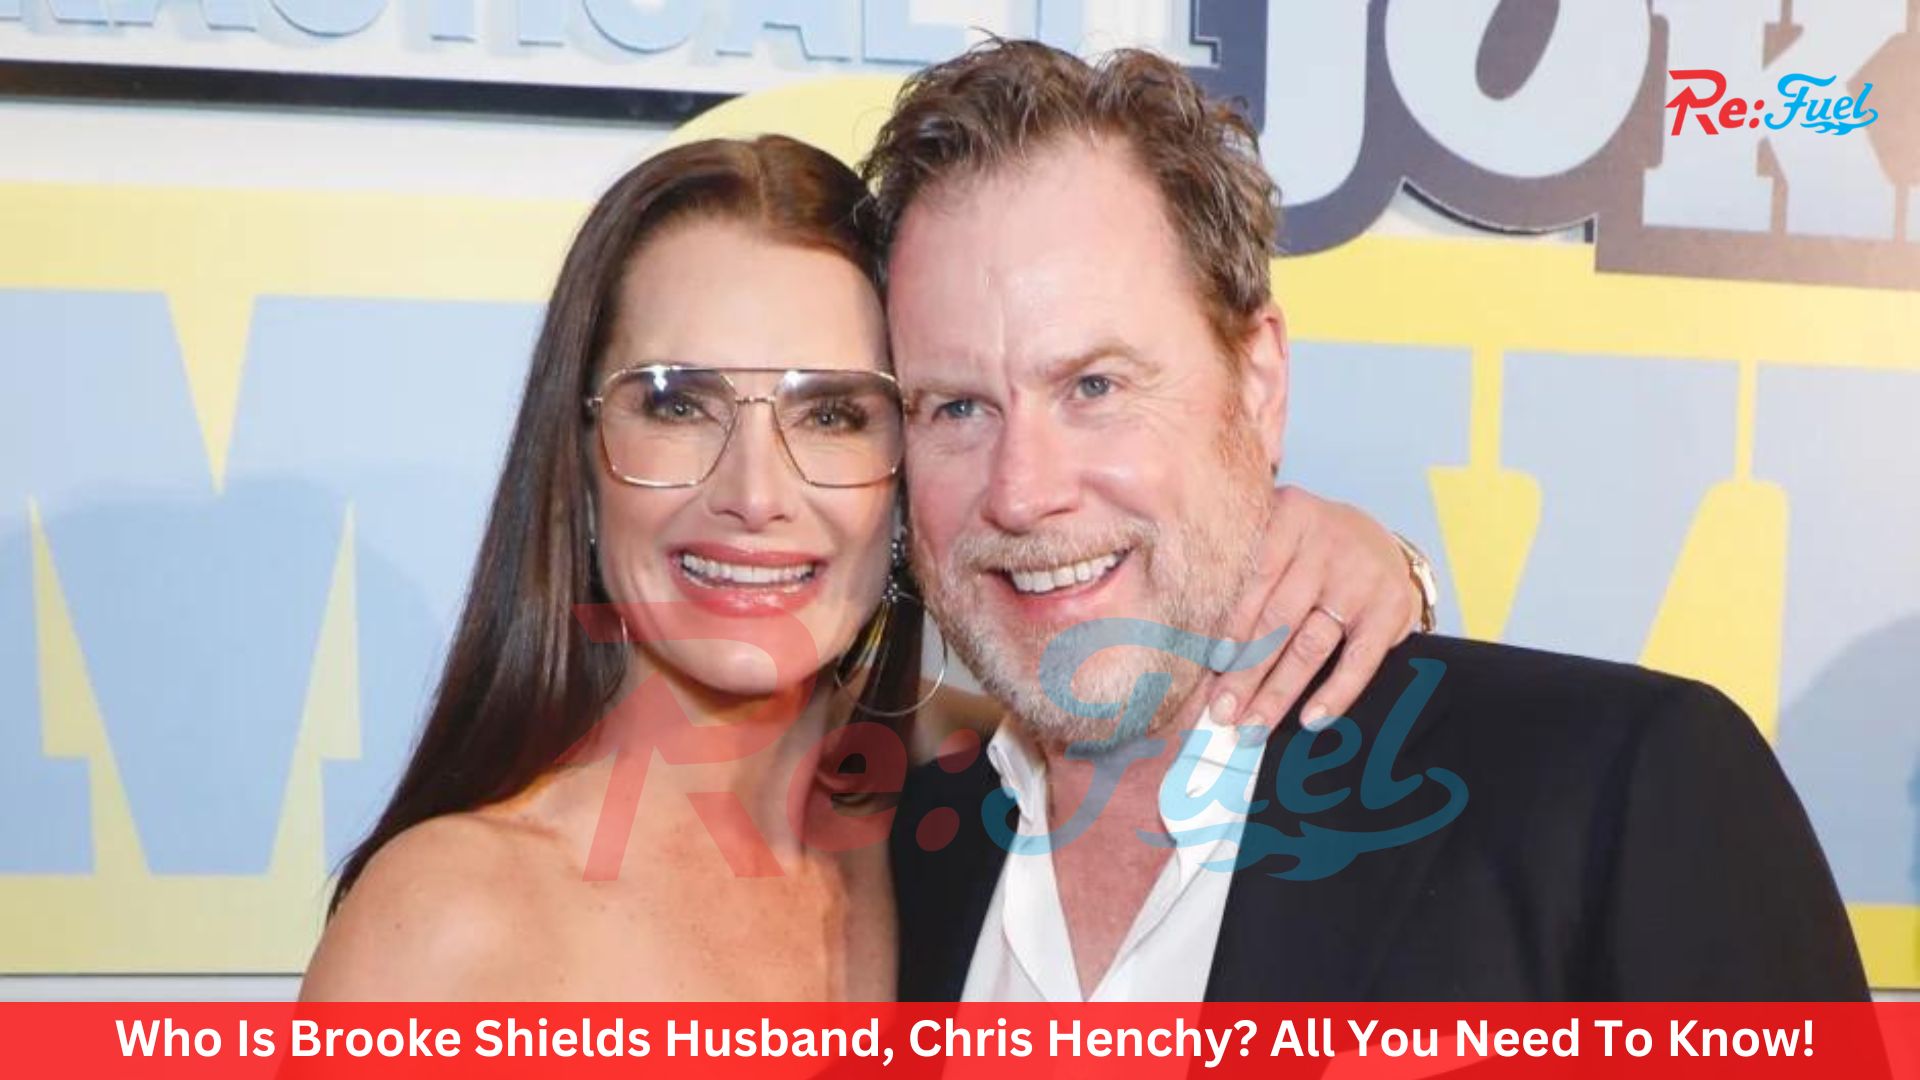 Who Is Brooke Shields Husband, Chris Henchy? All You Need To Know!